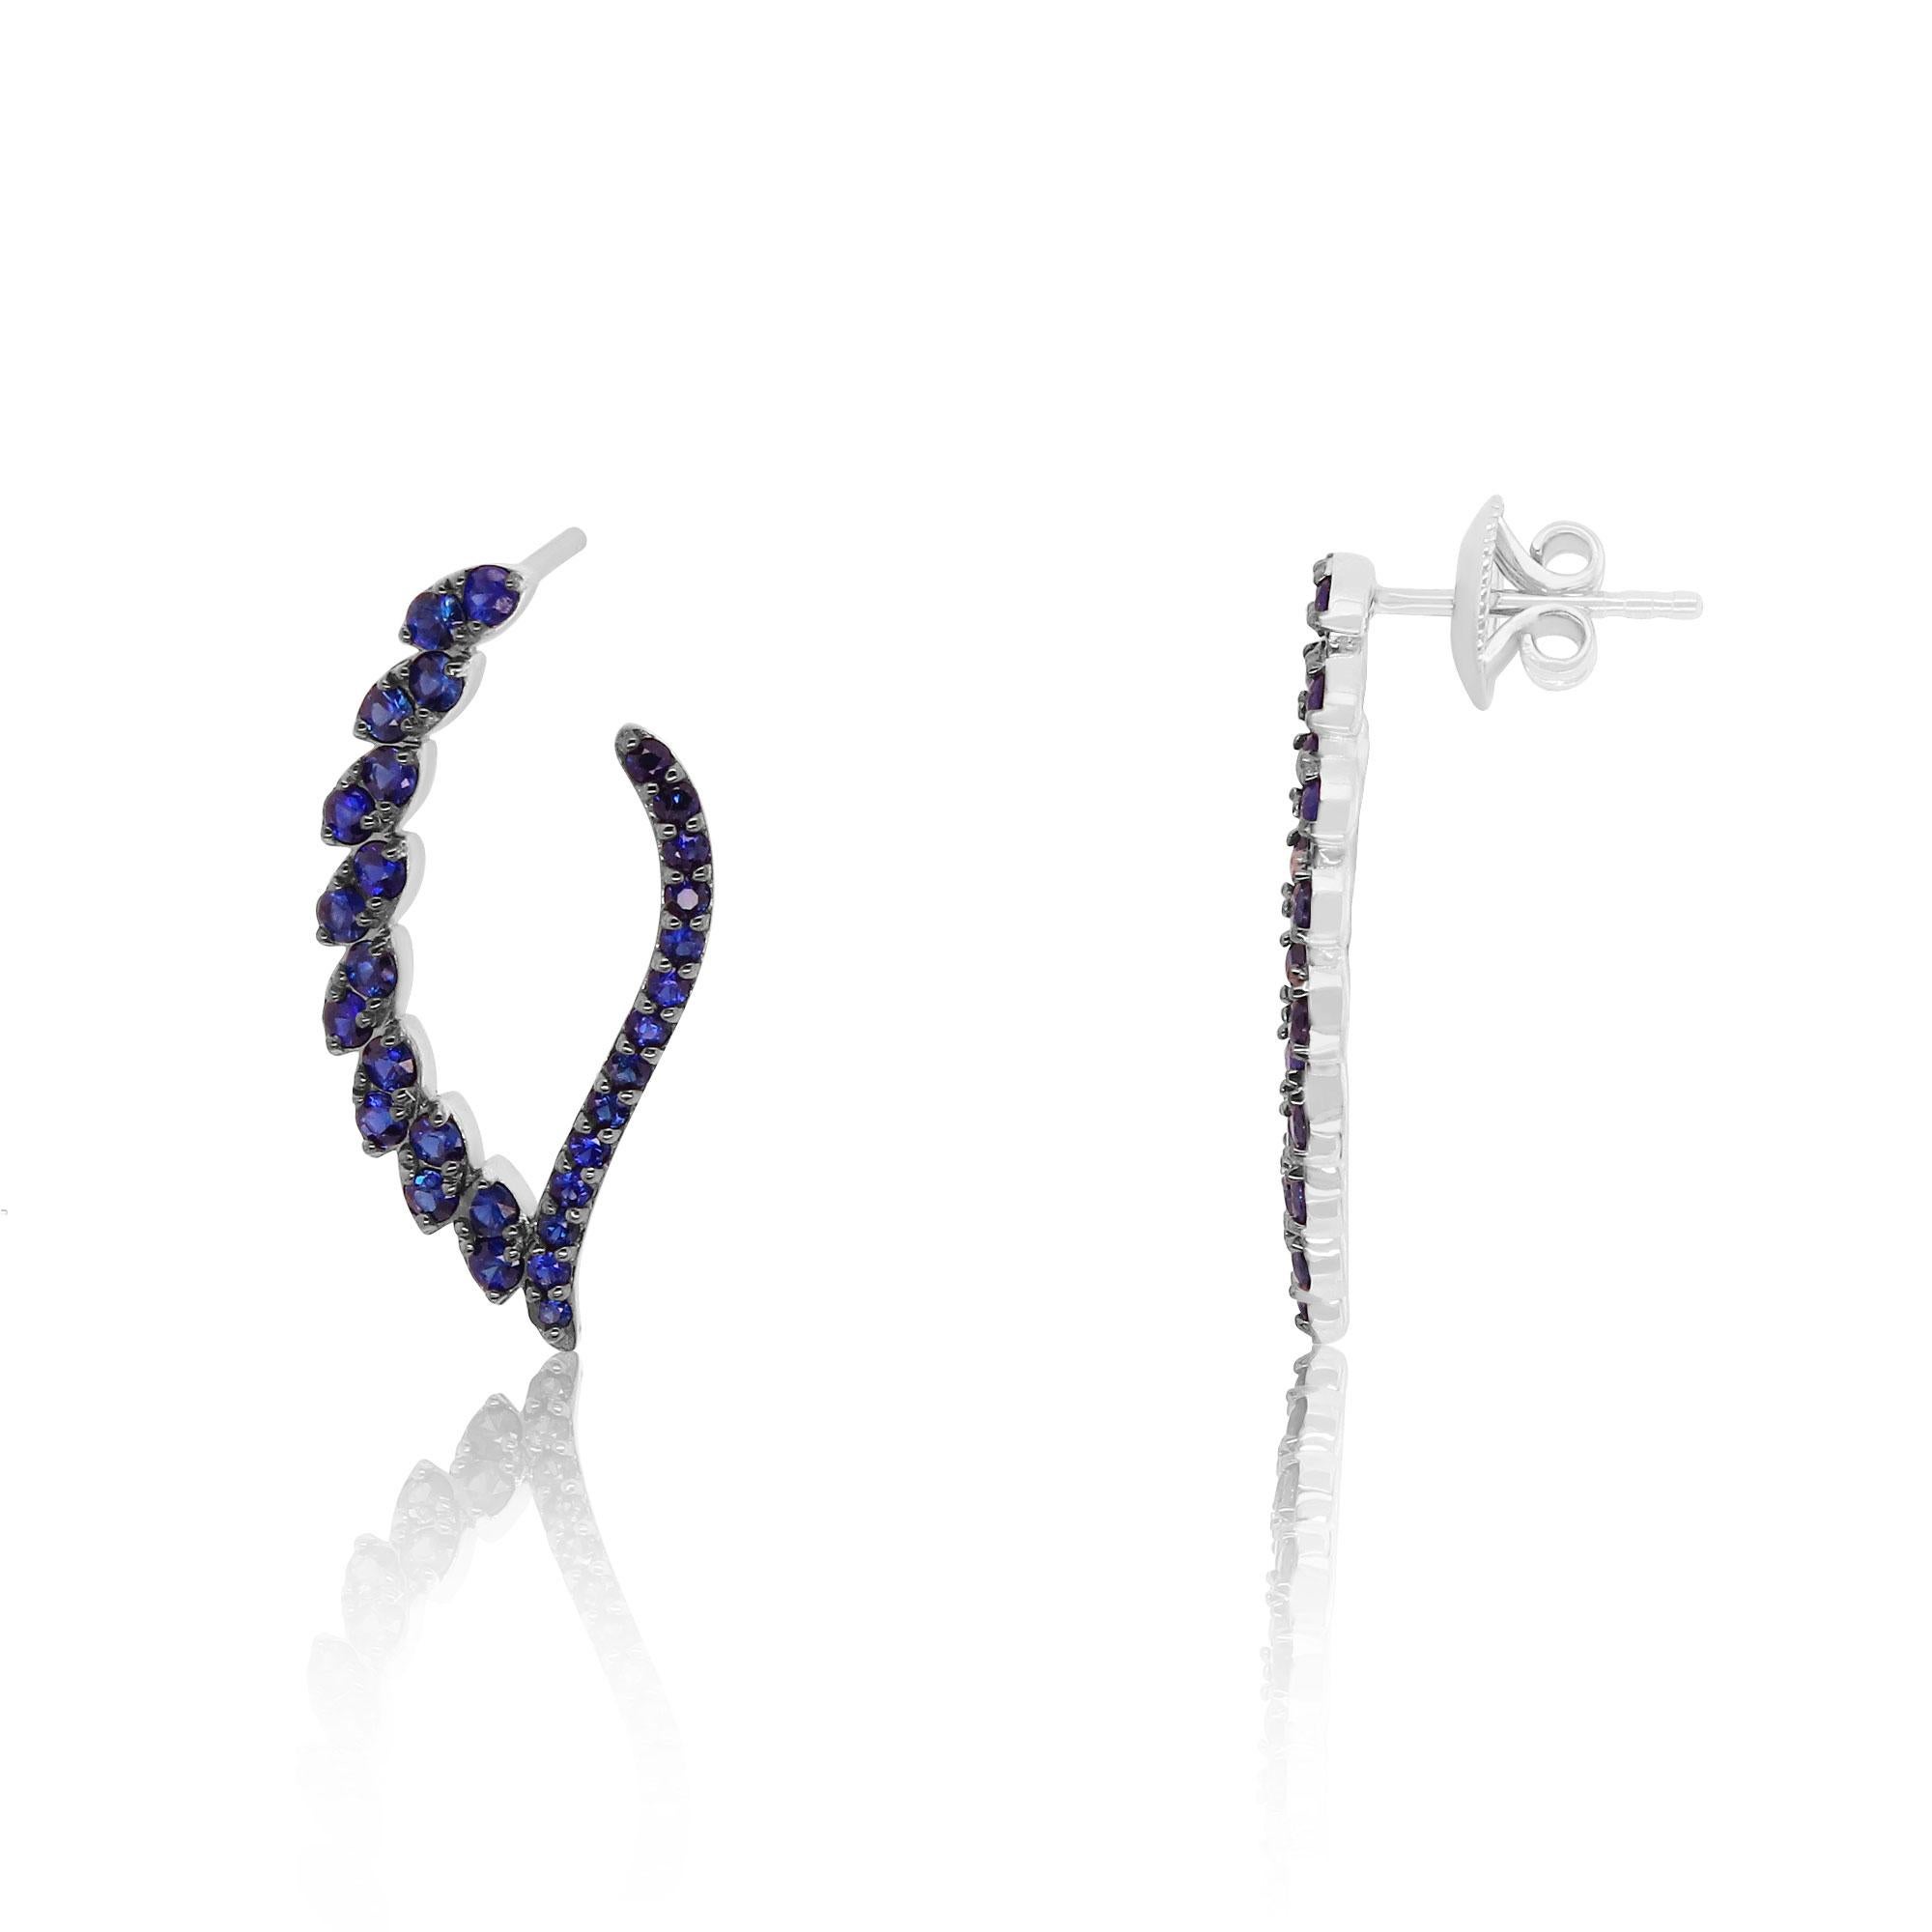 Material: 14k White Gold 
Stone Details: 60 Round Blue Sapphires at 1.75 Carats Total

Fine one-of-a kind craftsmanship meets incredible quality in this breathtaking piece of jewelry.

All Alberto pieces are made in the U.S.A and come with a